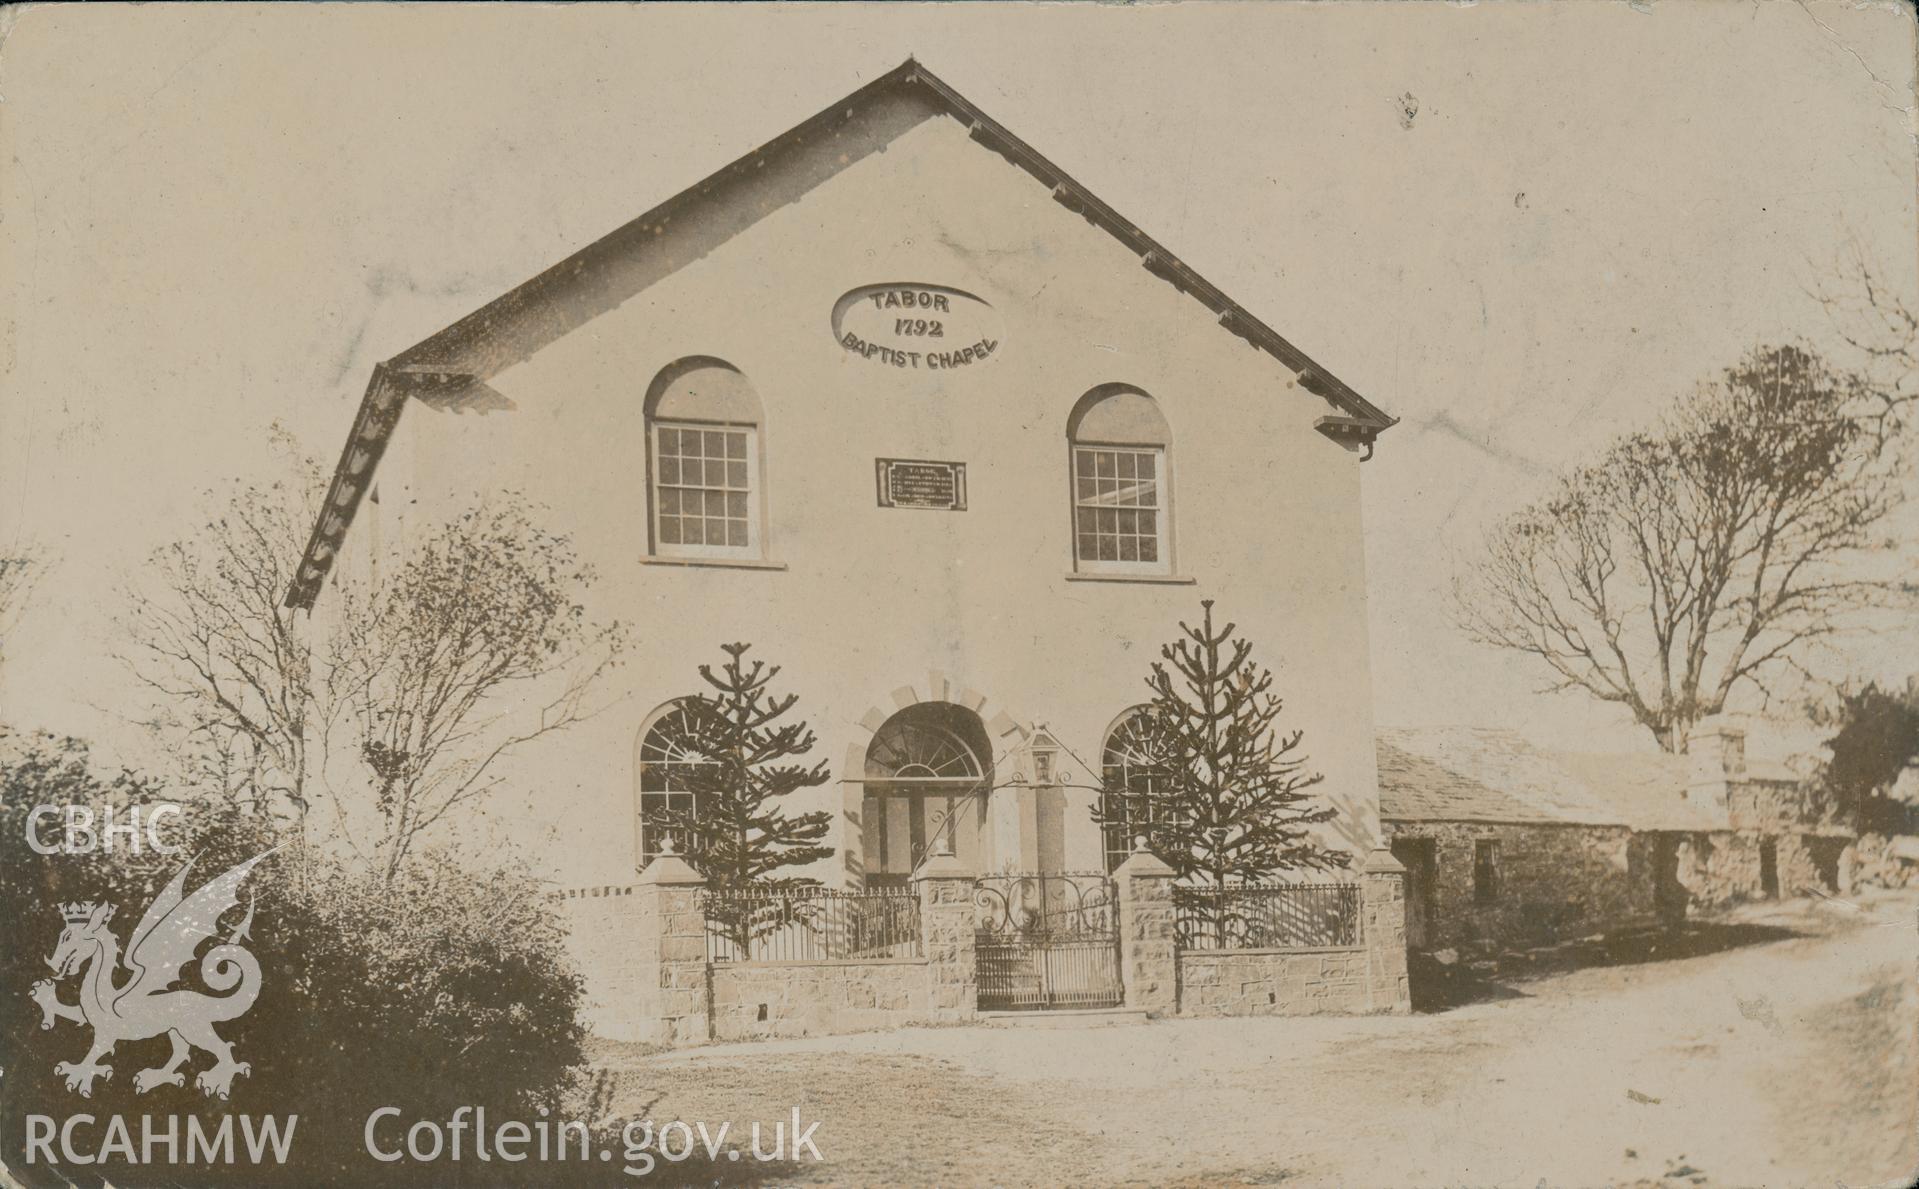 Digital copy of monochrome postcard showing exterior view of Tabor Welsh Baptist chapel, Dinas Cross. Franked on 19th August 1906. Loaned for copying by Thomas Lloyd.